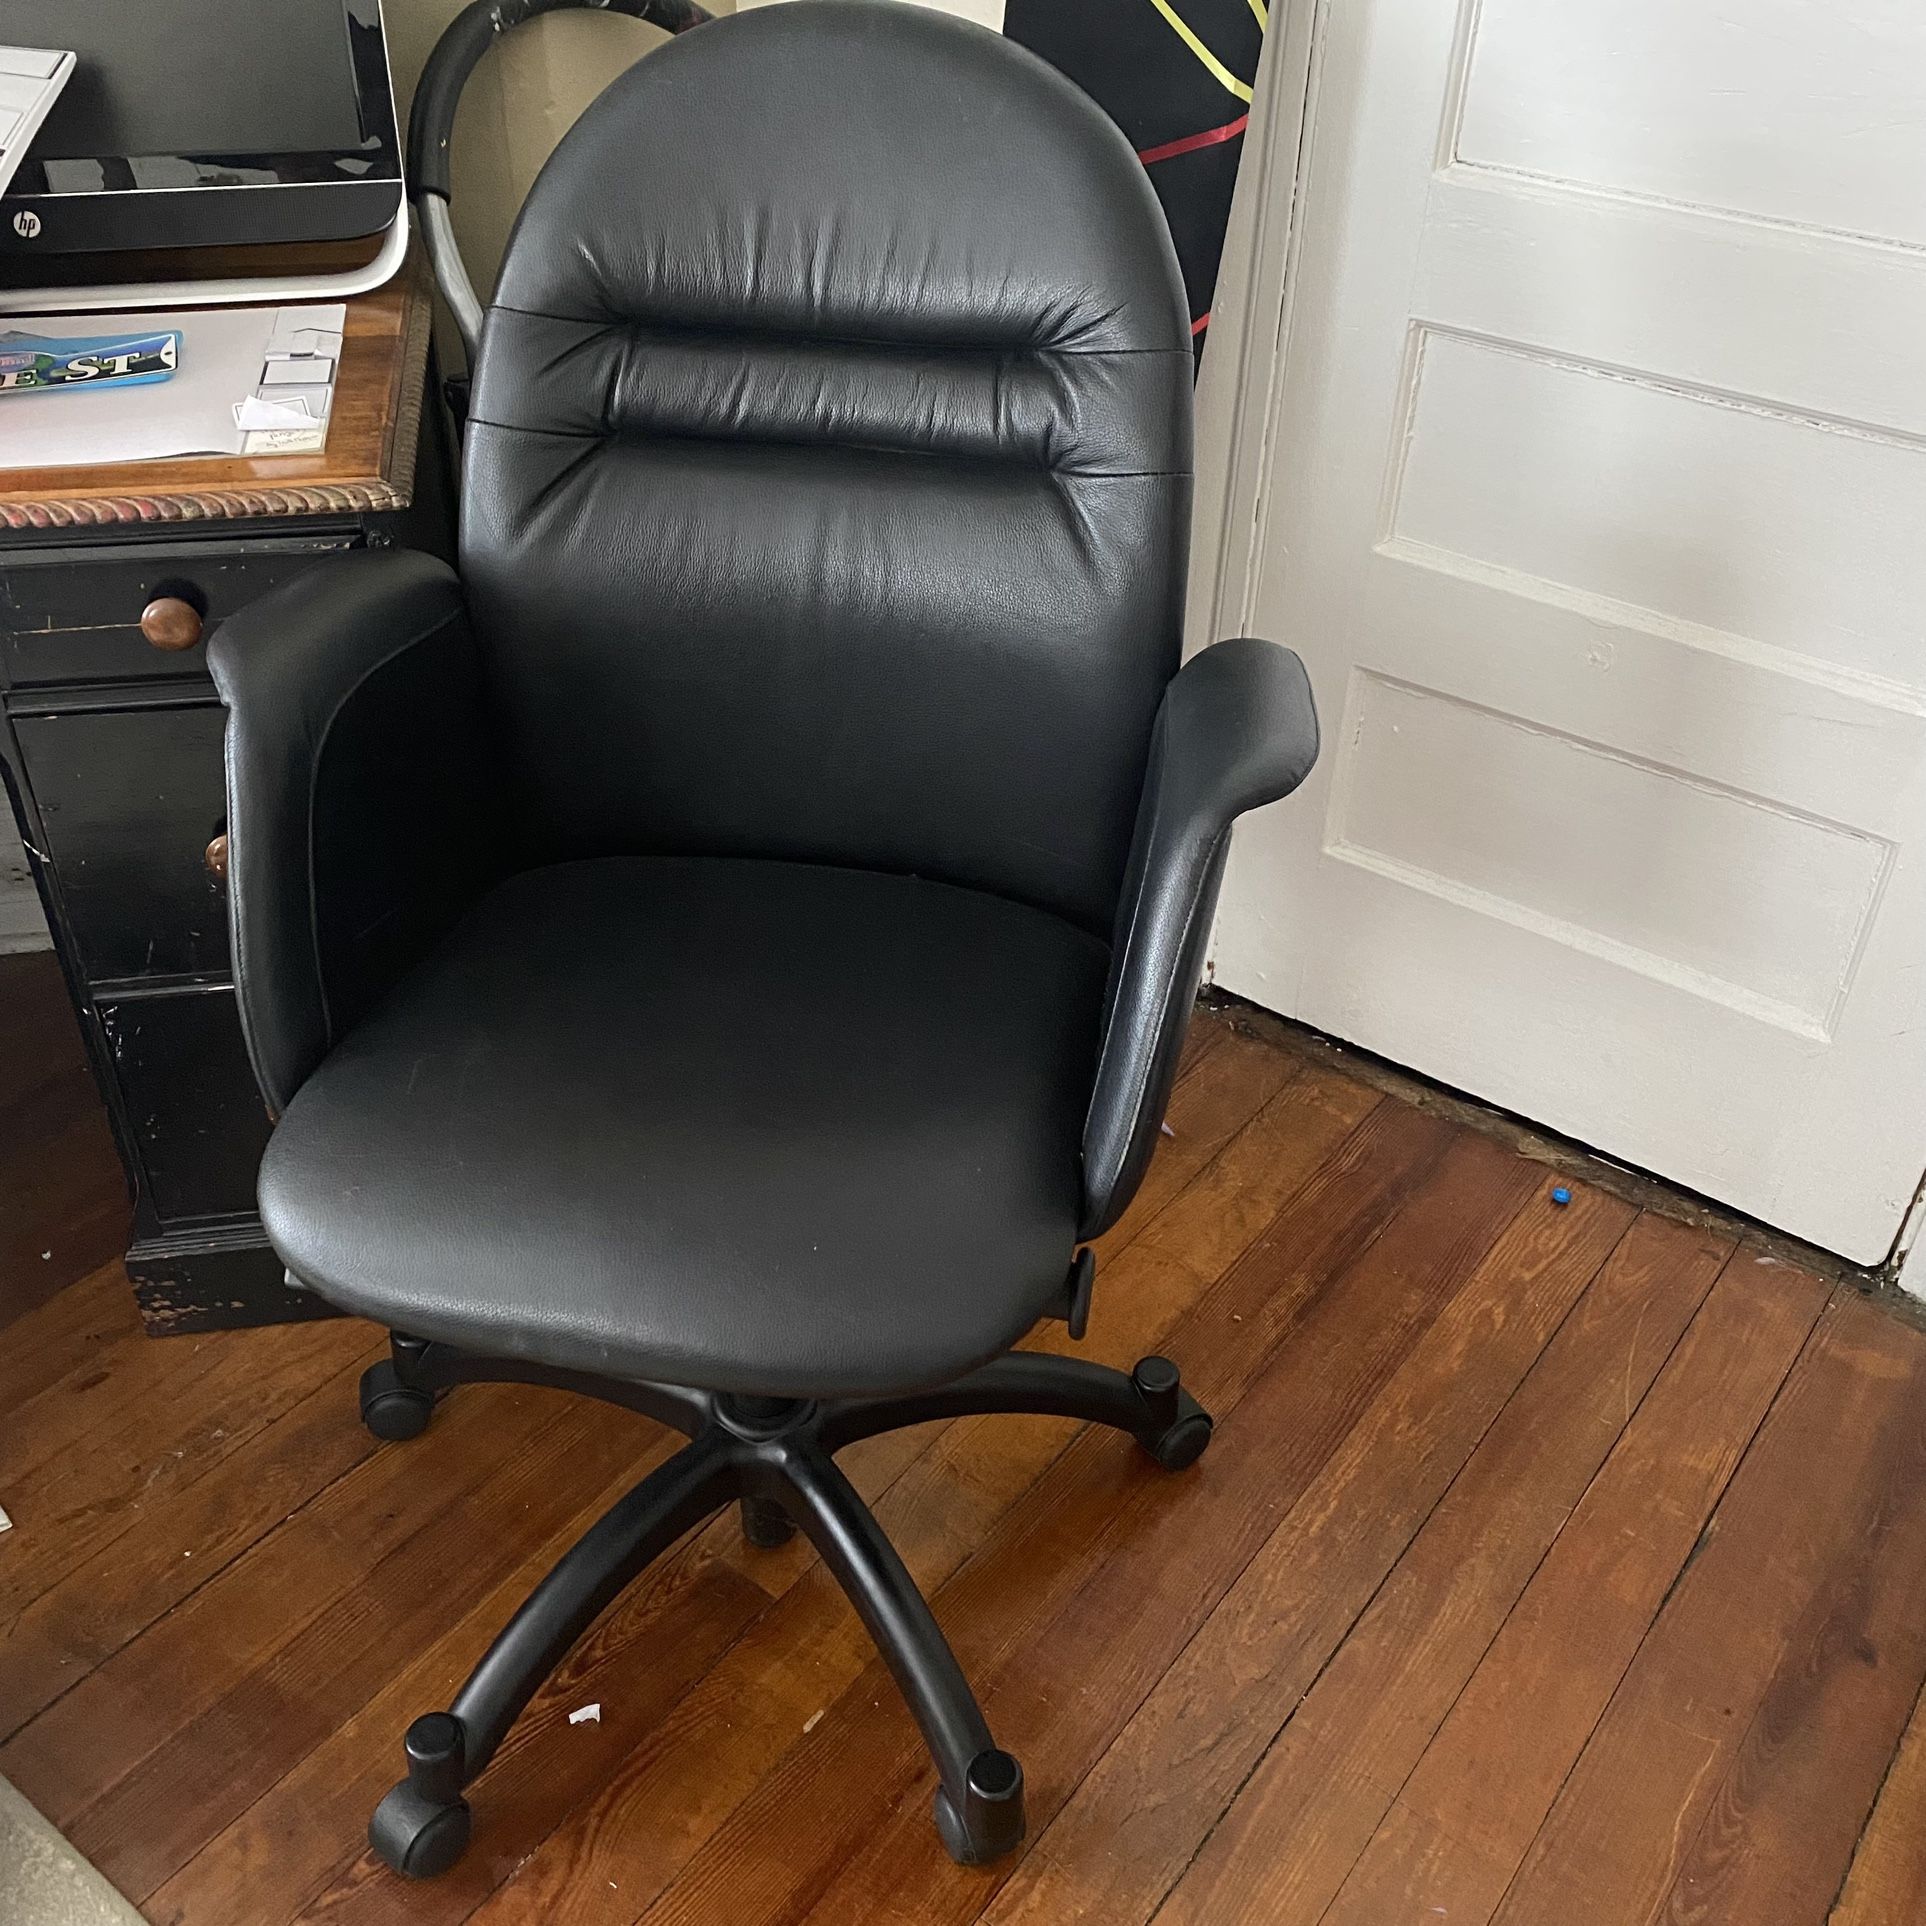 Black Leather Office Desk Chair With Wheels